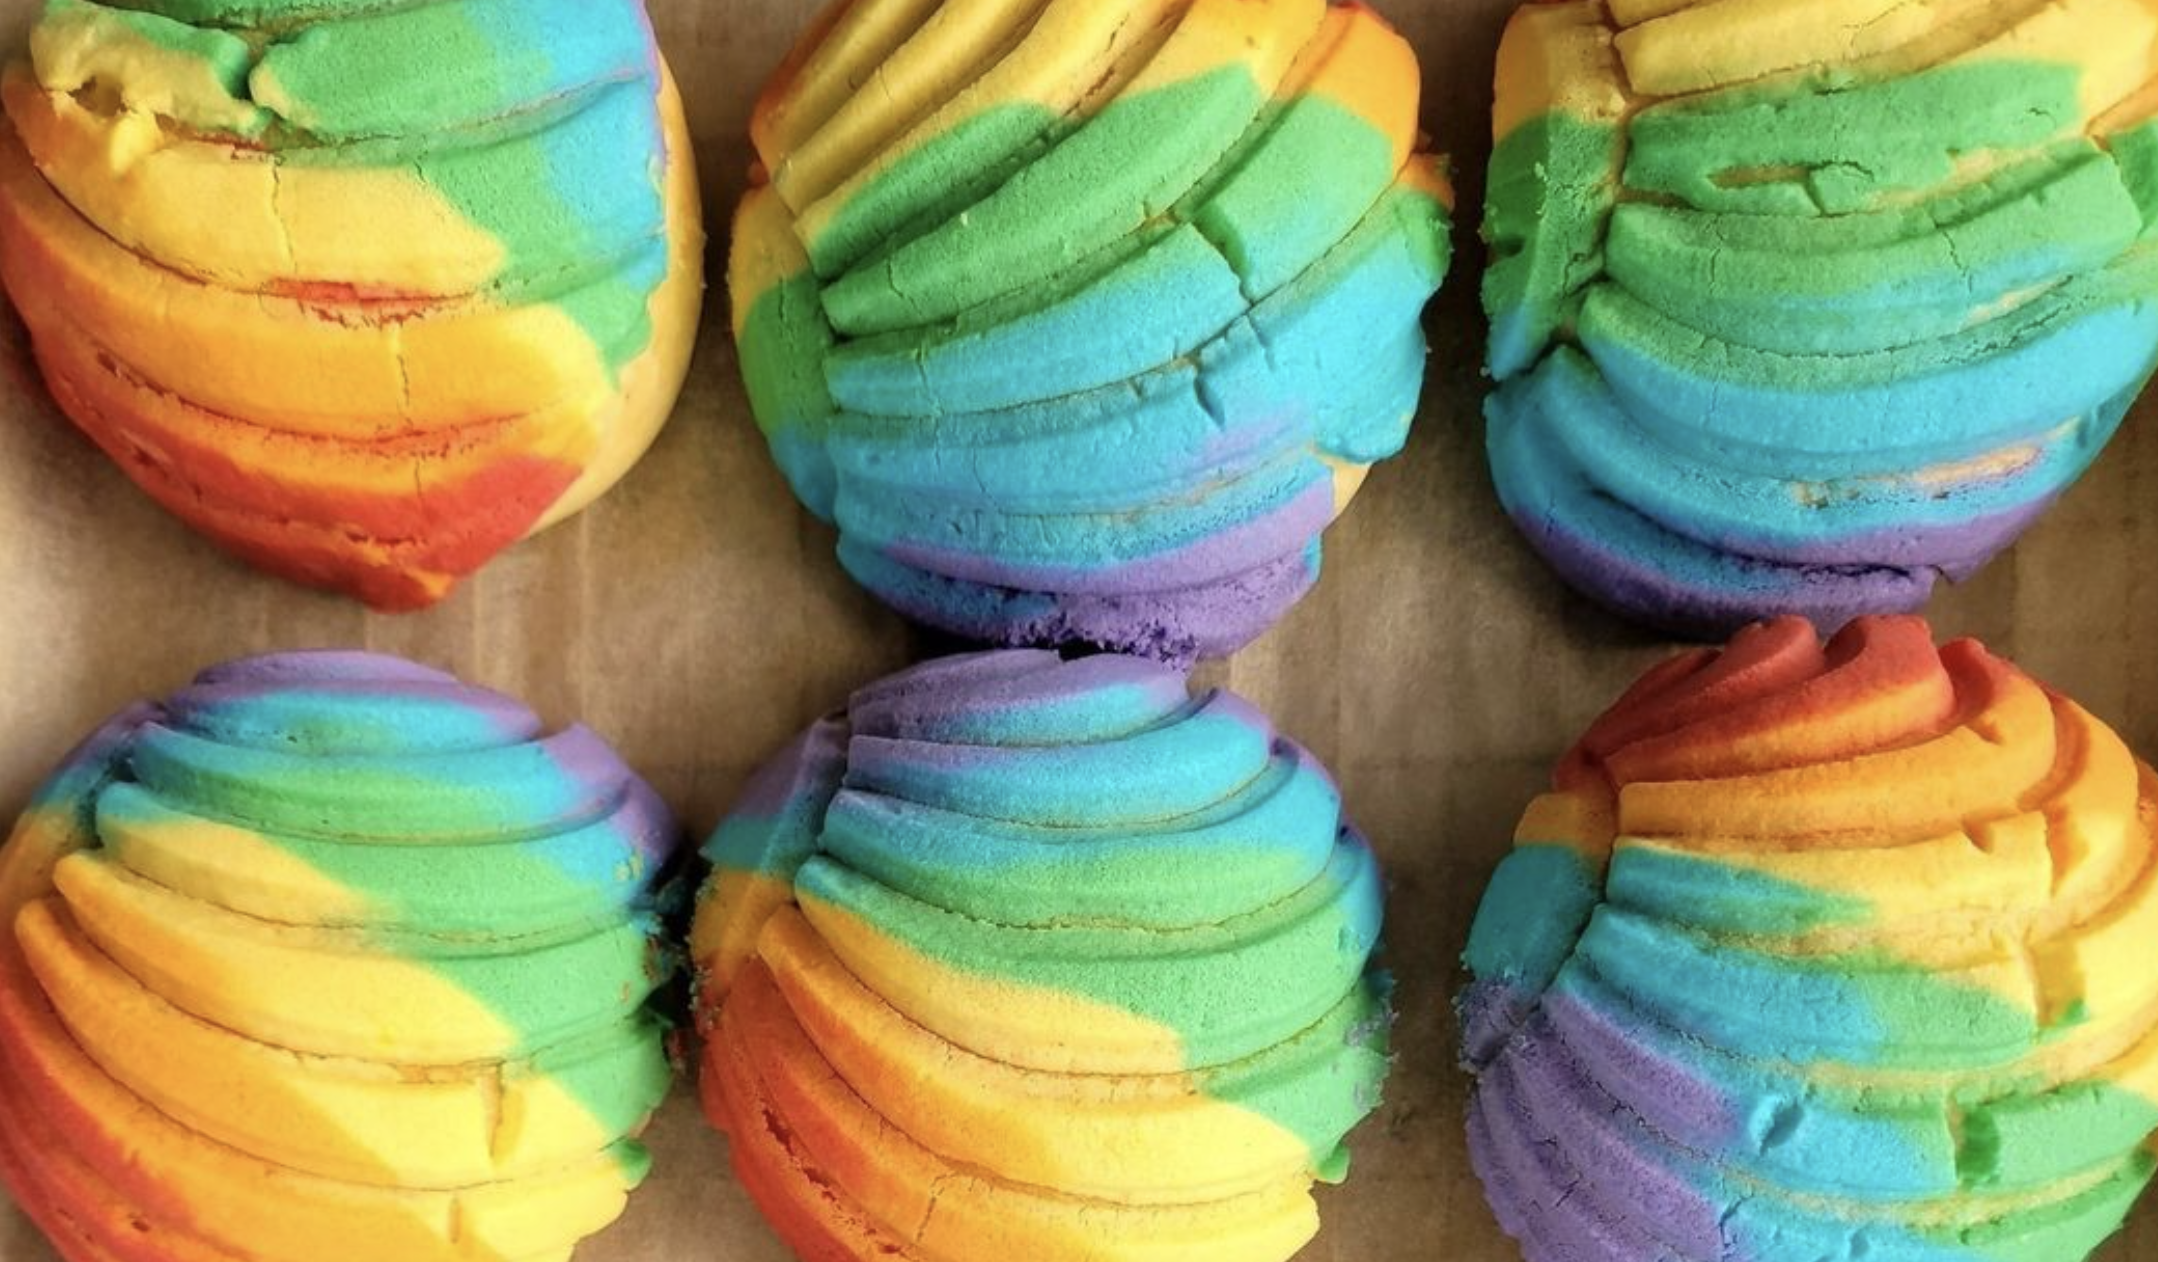 Colorful pride-colored pastries at the South Lake Union Gobble Up Food Festival.